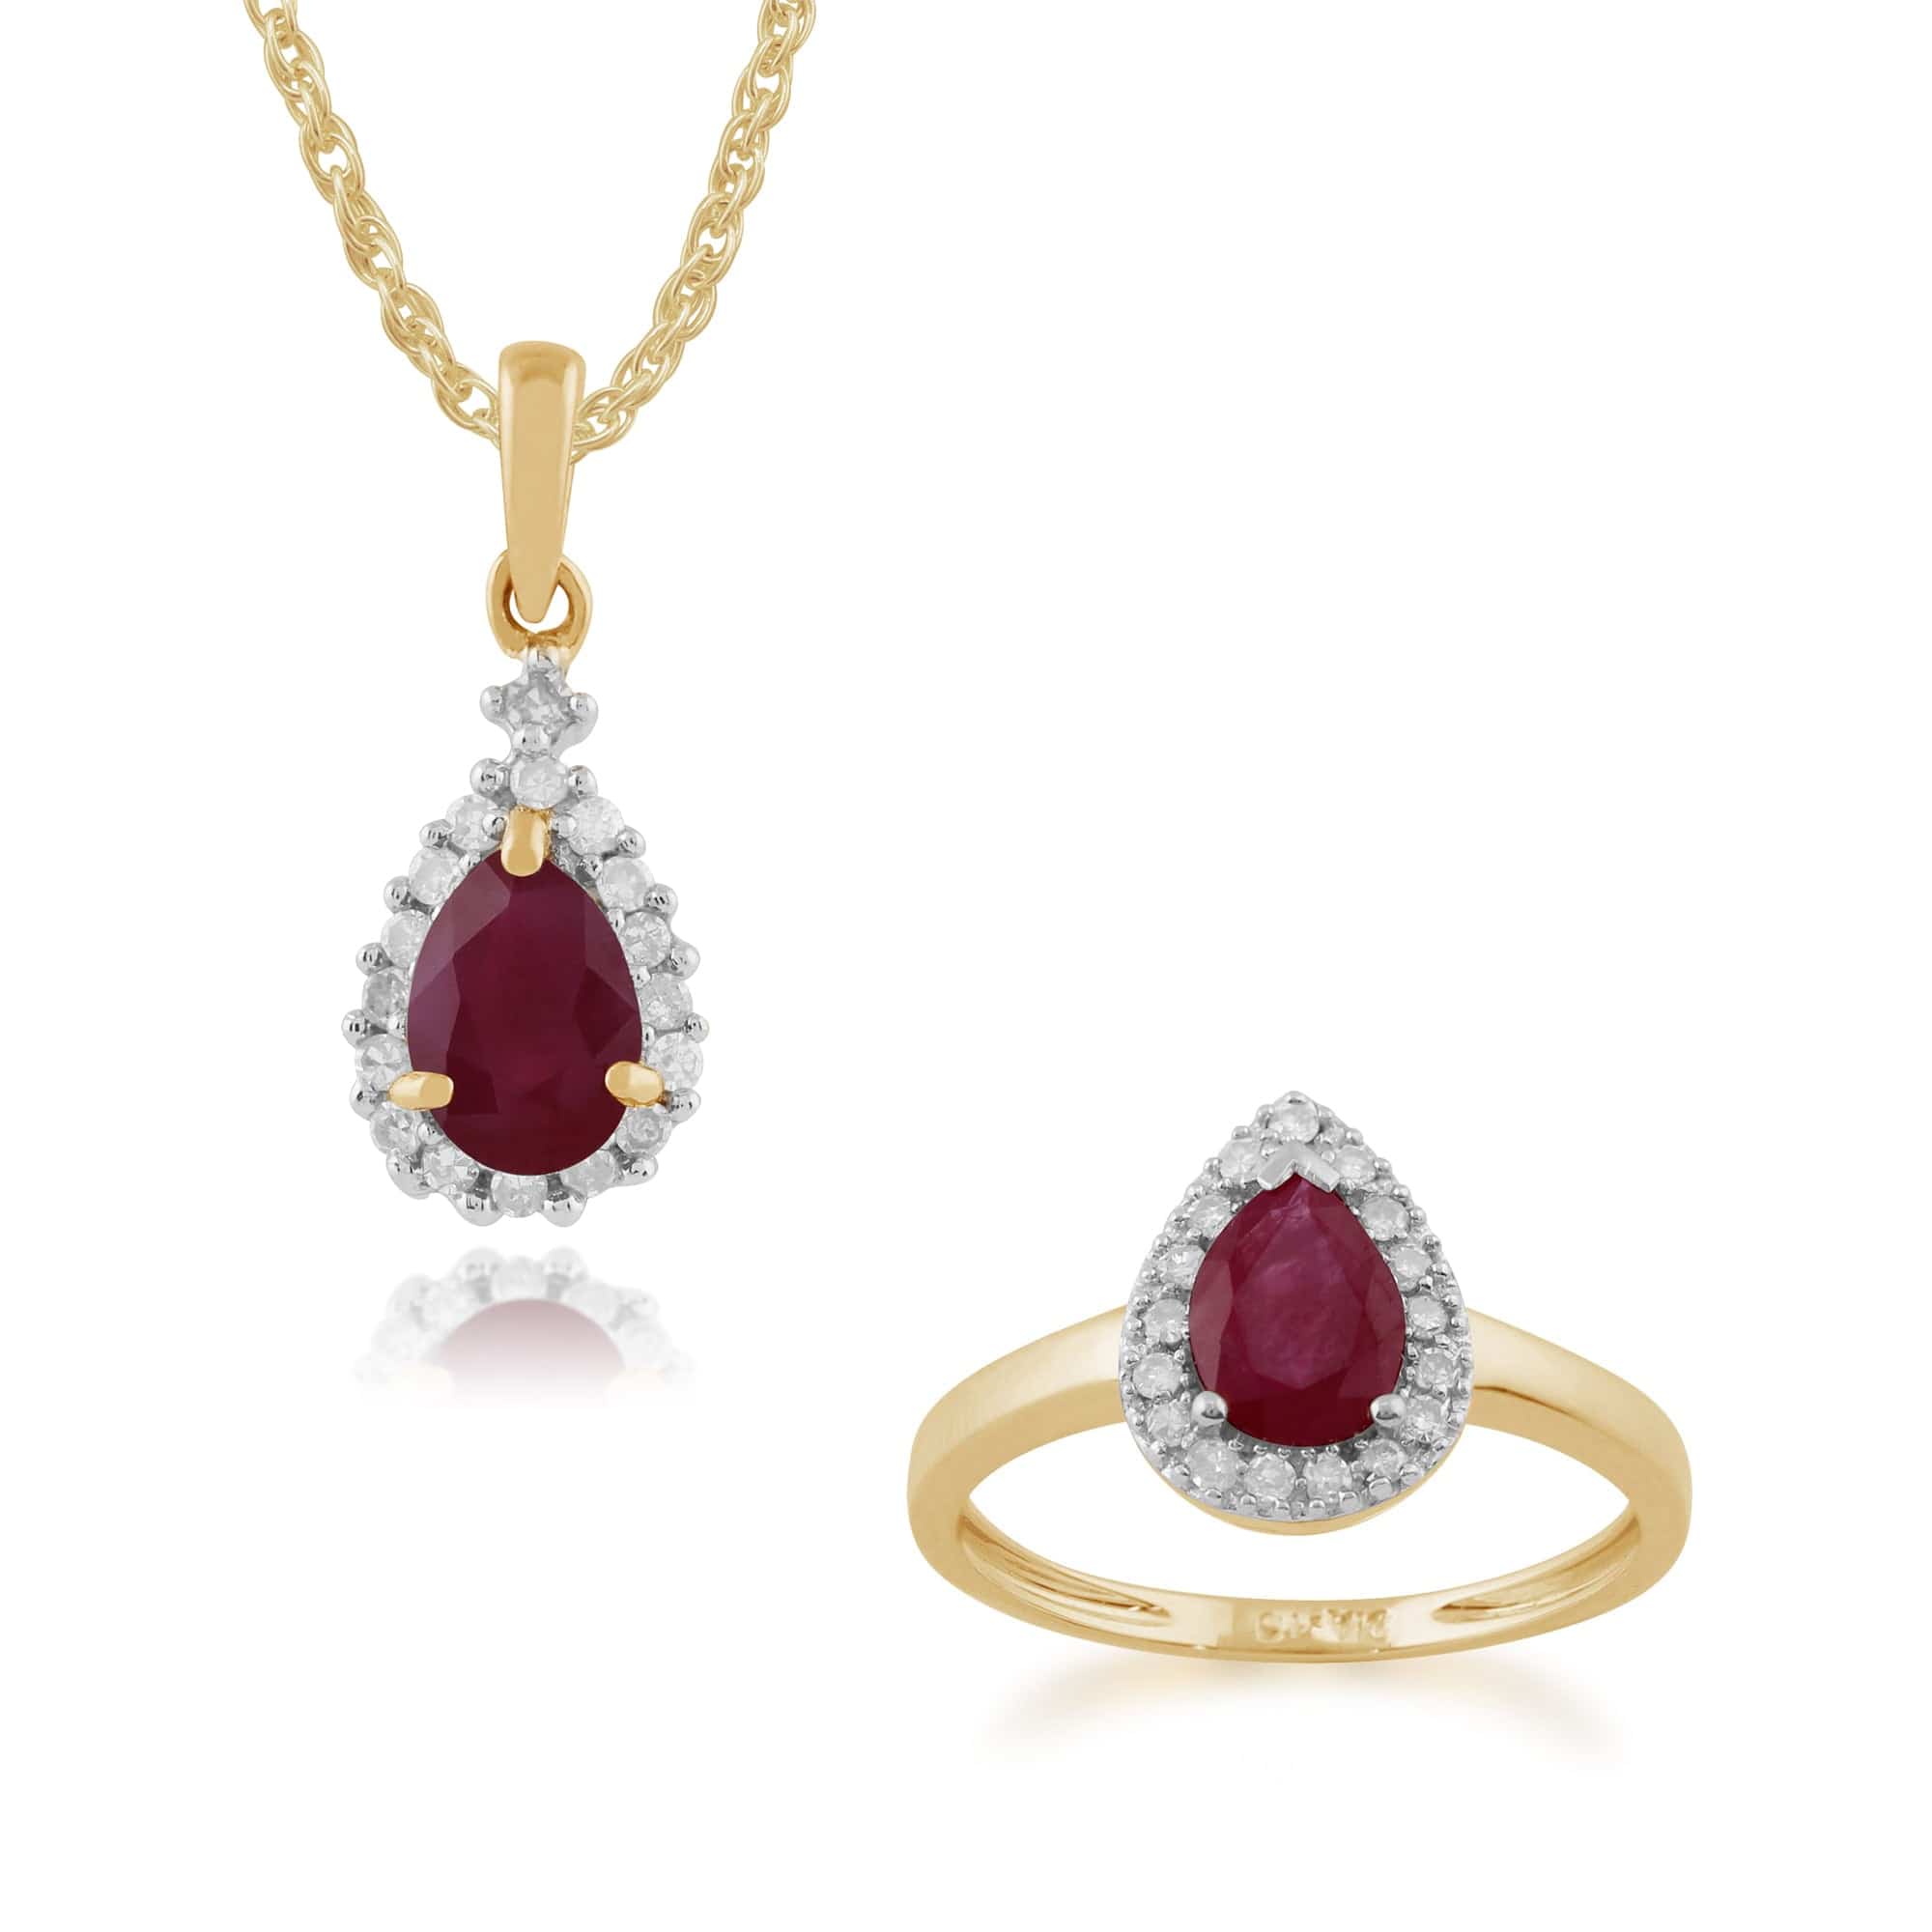 135P1404029-22617 Classic Pear Ruby & Diamond Halo Pendant & Ring Set in 9ct Yellow Gold 1